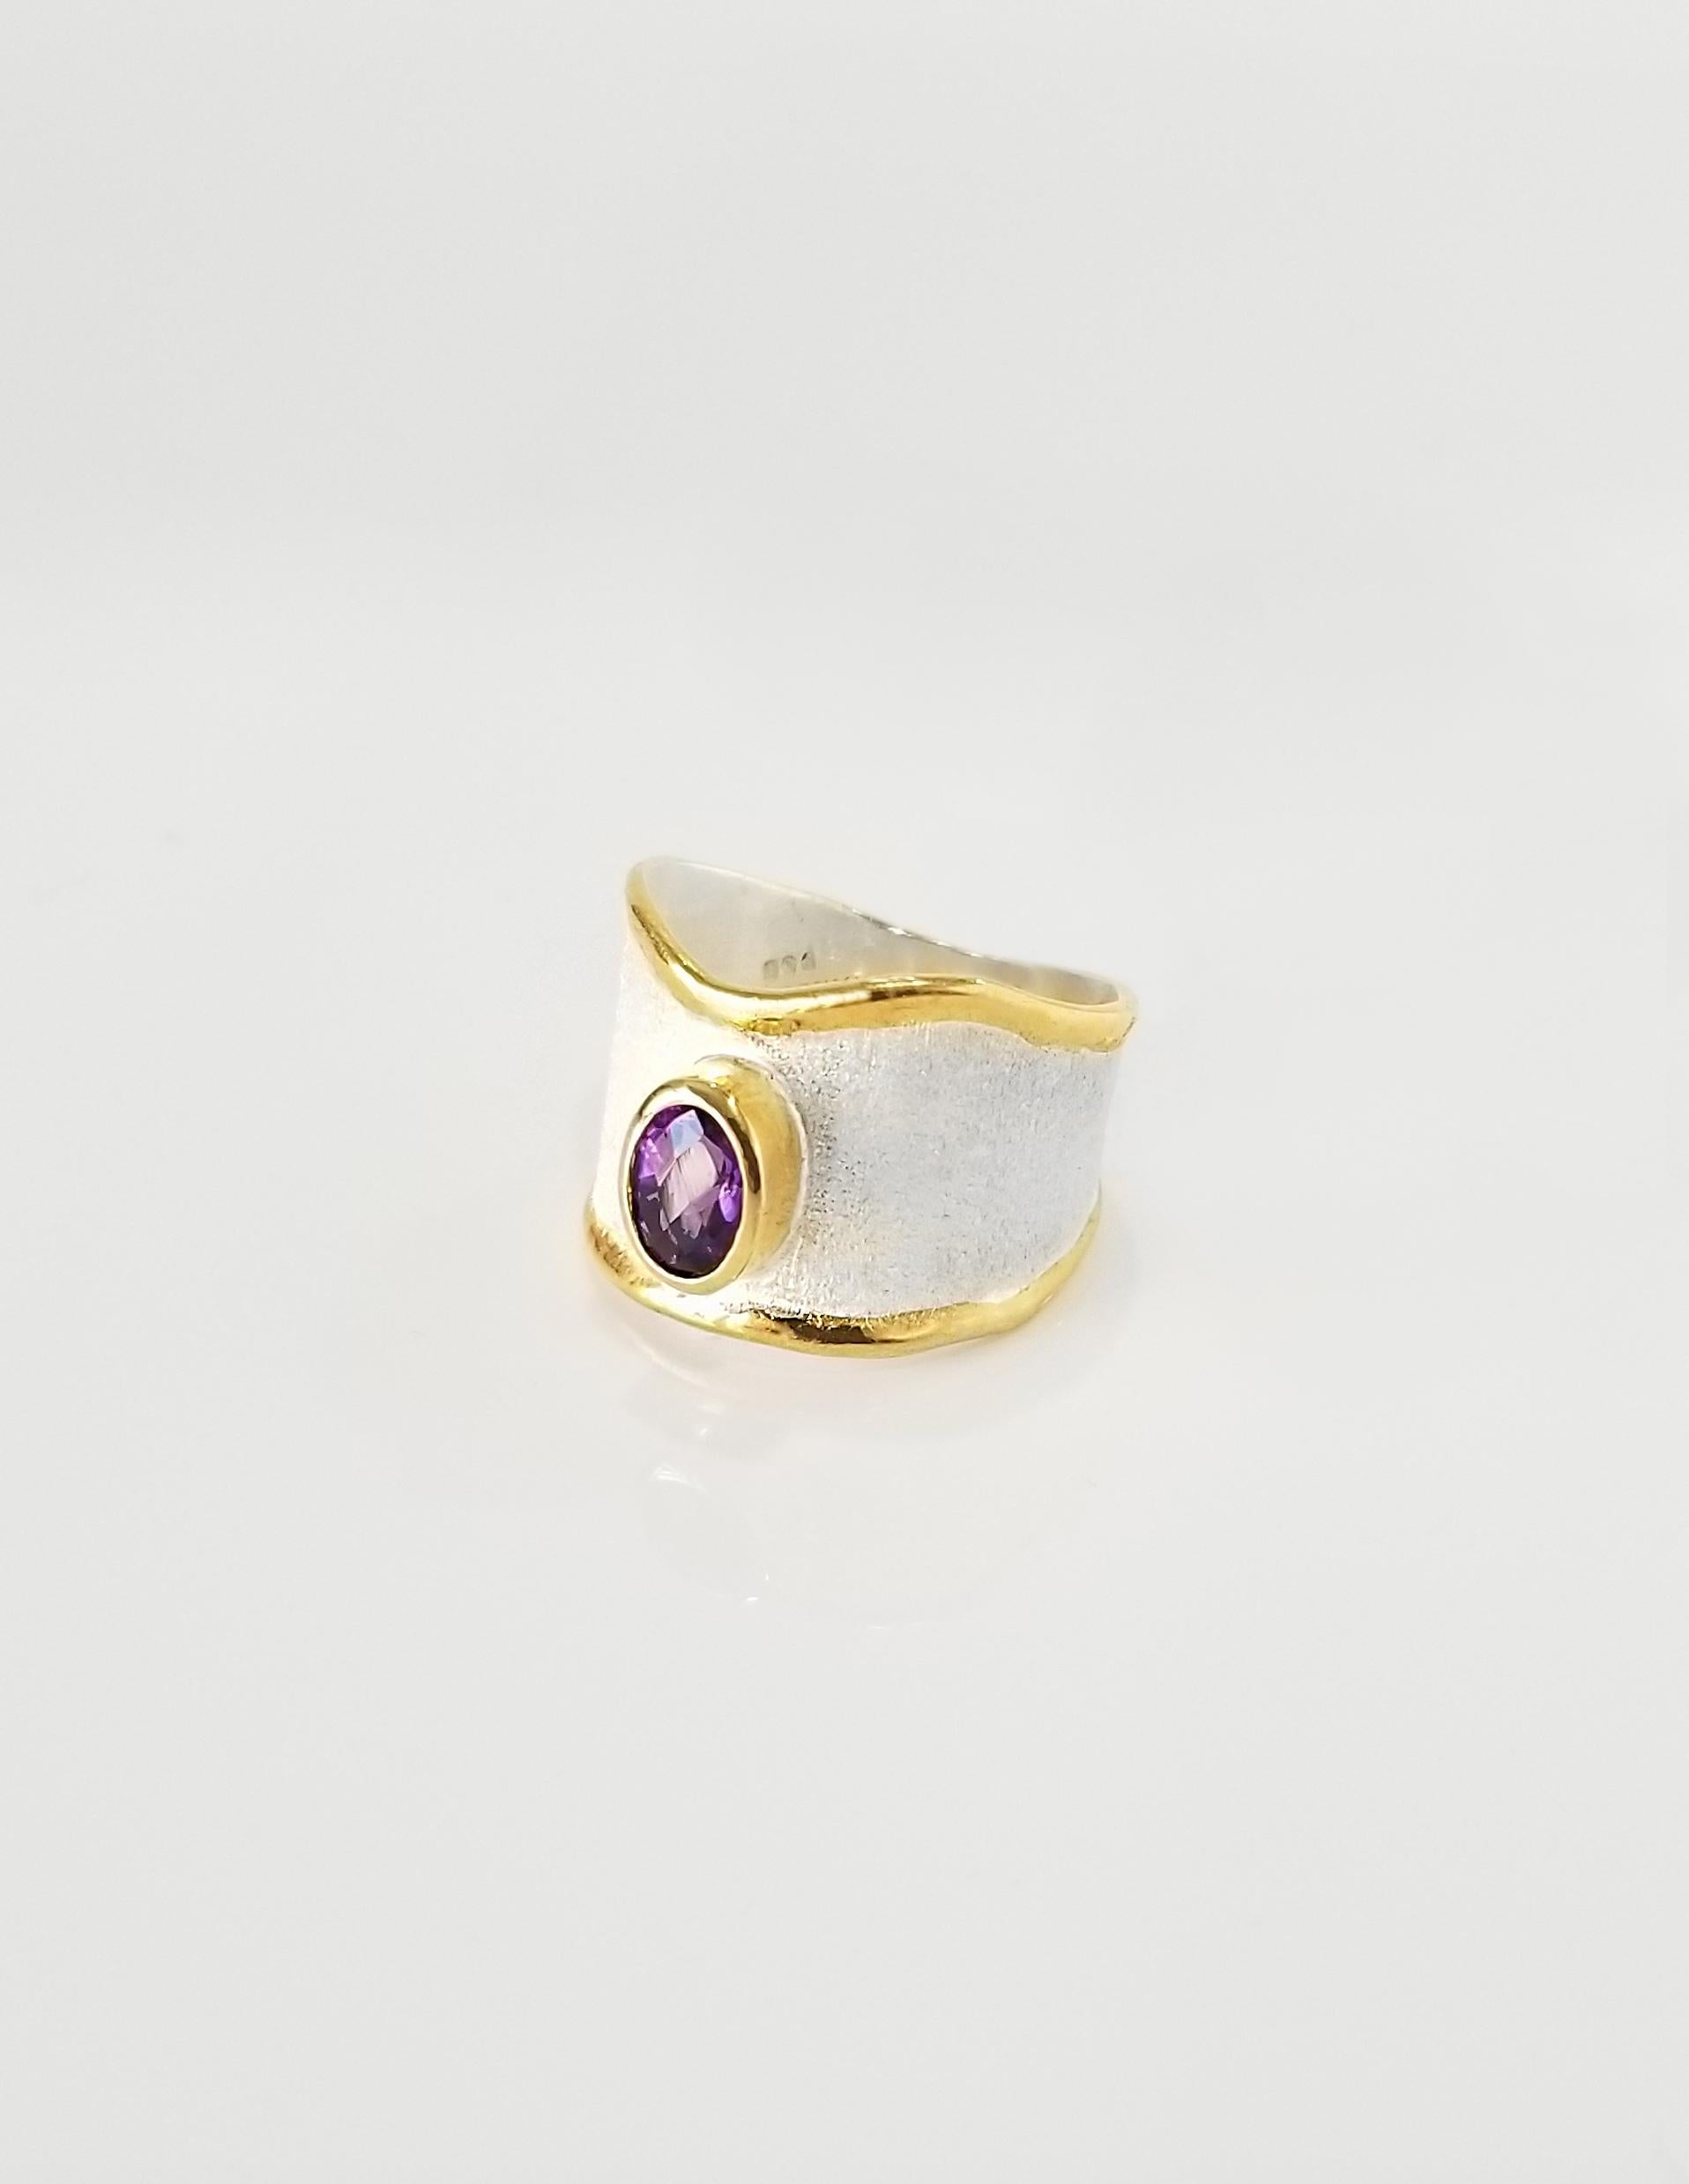 Yianni Creations Midas Collection 100% Handmade Artisan Ring from Fine Silver  950 purity plated with Palladium to resist the Elements. Liquid edges are decorated with a layover of 24 Karat Yellow Gold. The ring features 0.85 Carat Oval Shape